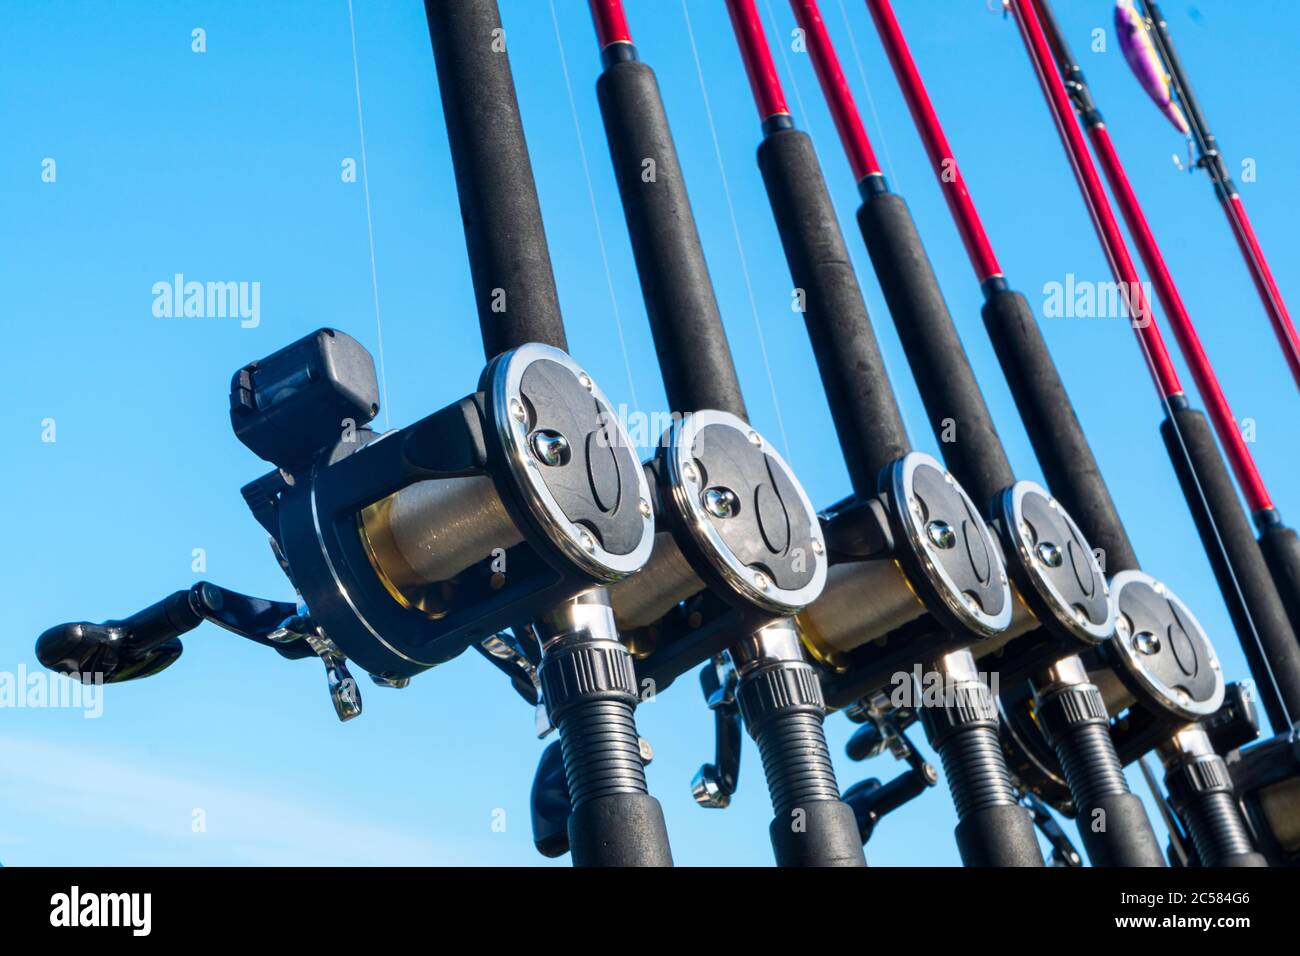 https://c8.alamy.com/comp/2C584G6/fishing-trolling-boat-rods-in-rod-holder-big-game-fishing-fishing-reels-and-rods-pattern-on-boat-sea-fishing-rods-and-reels-in-a-row-2C584G6.jpg